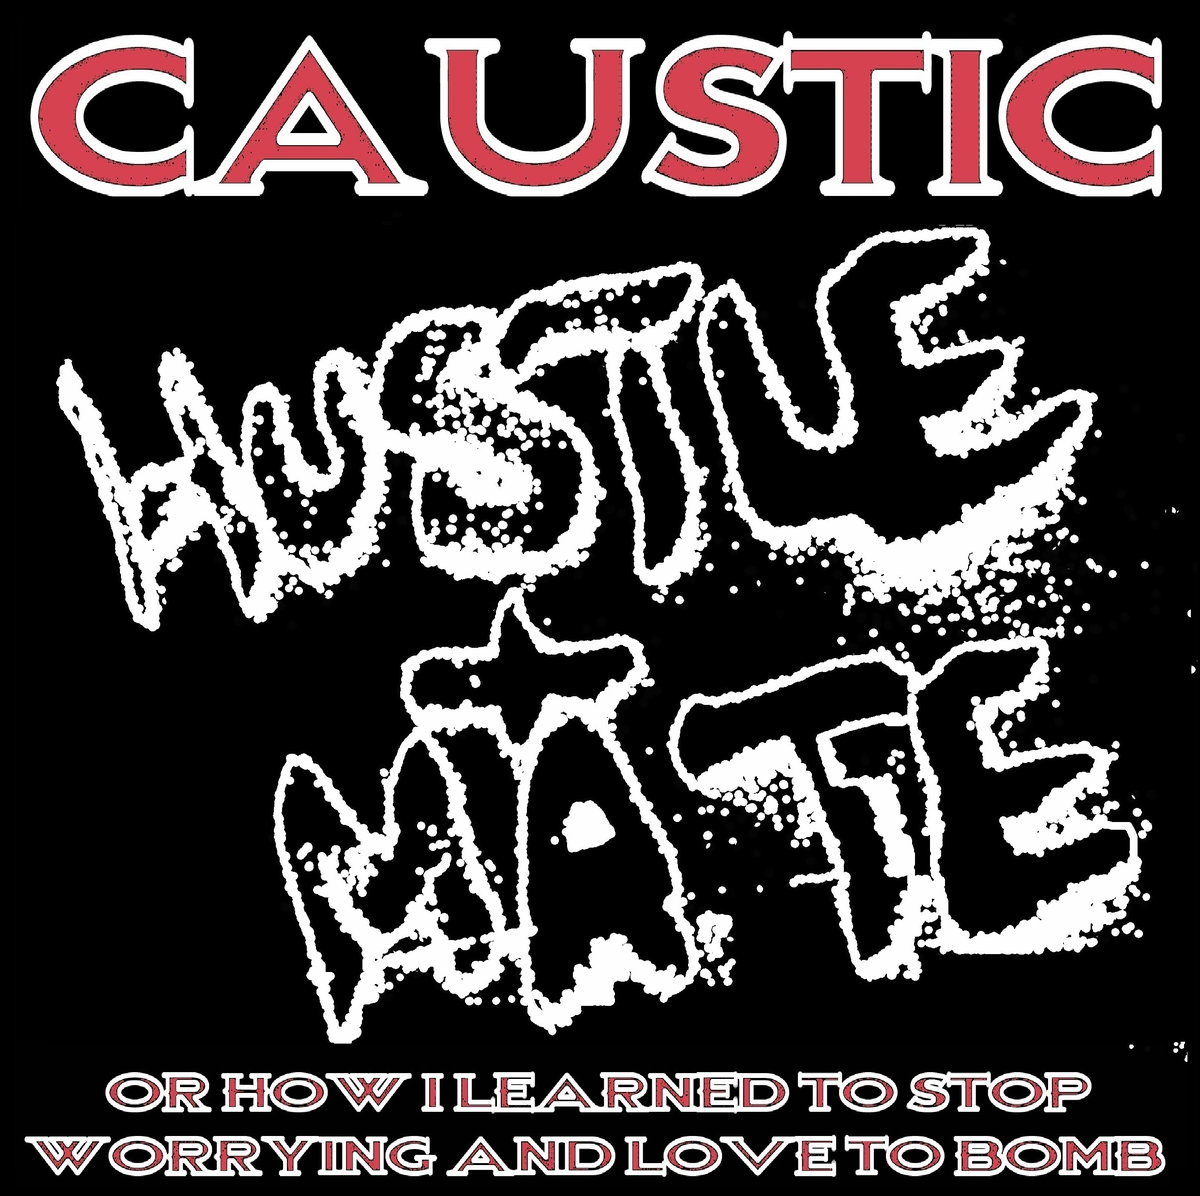 Caustic, “Hustle and Mate”